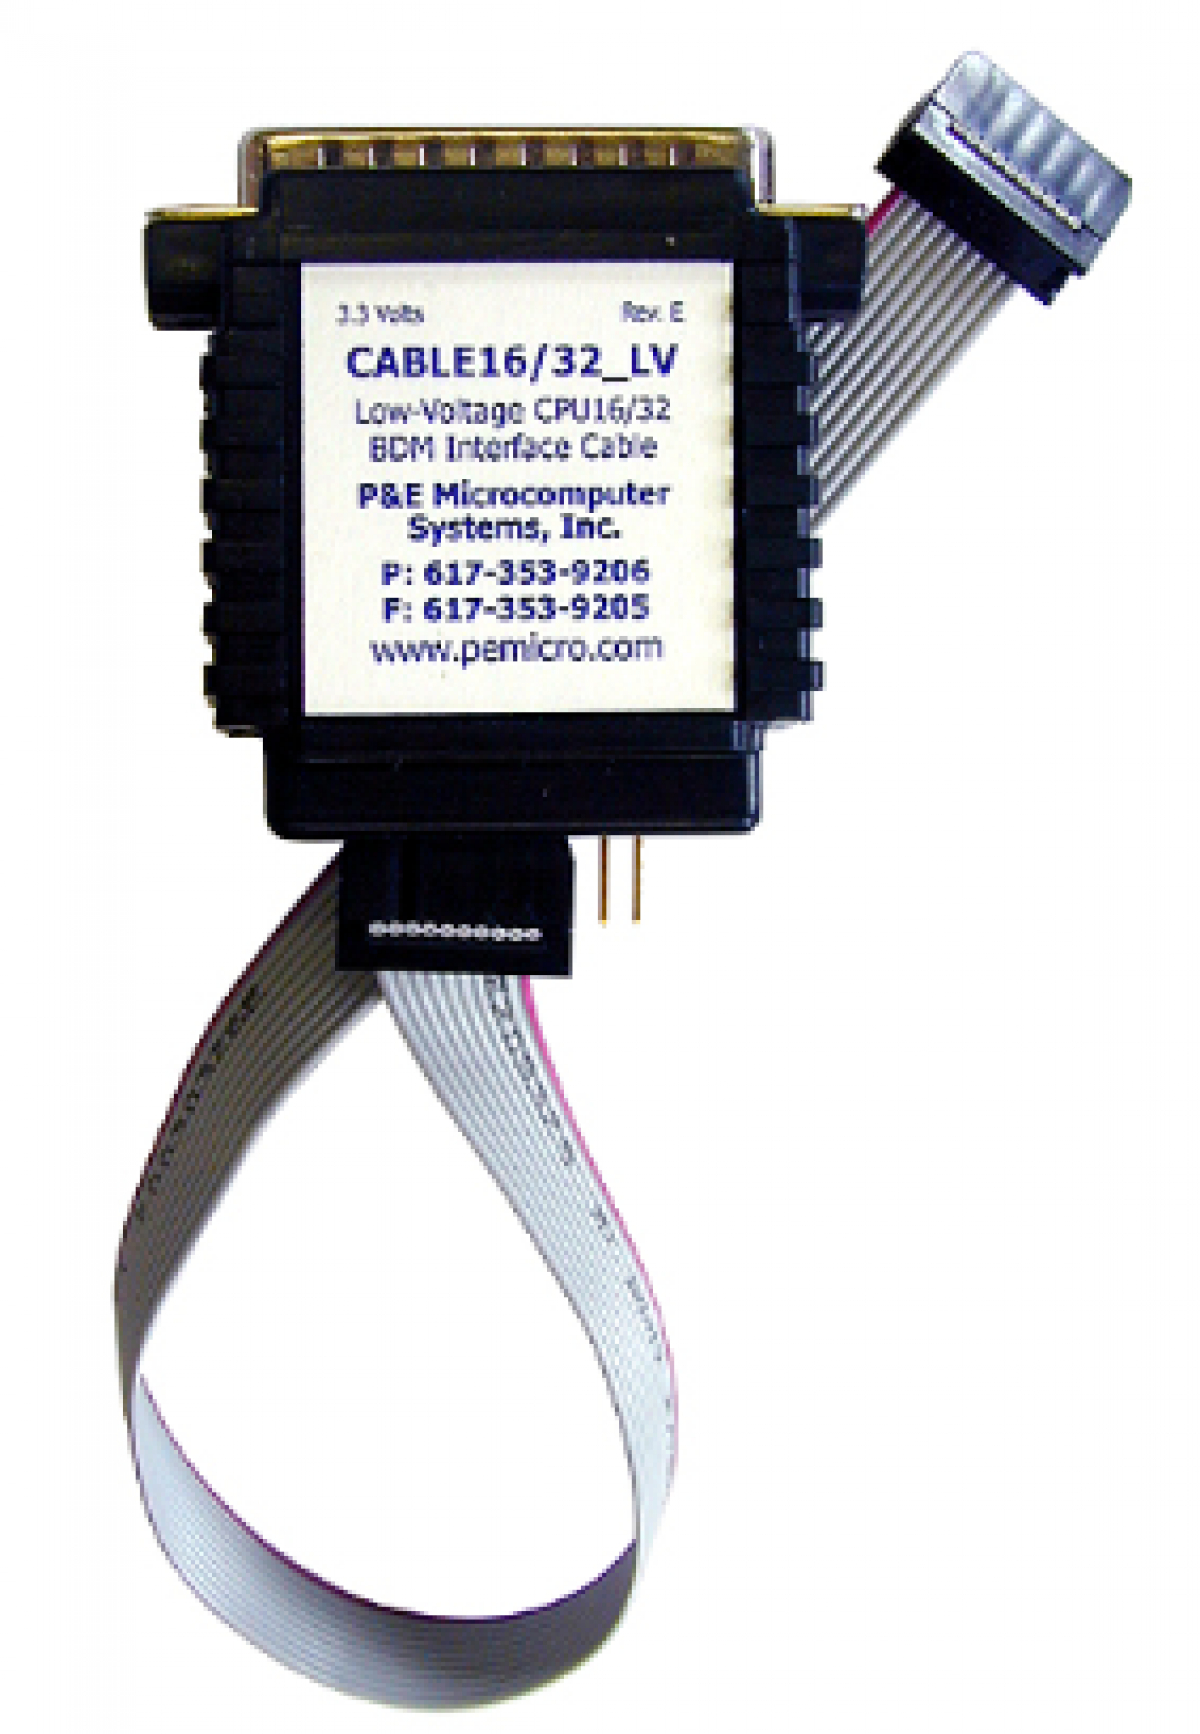 CABLE 16_32LV (Discontinued)